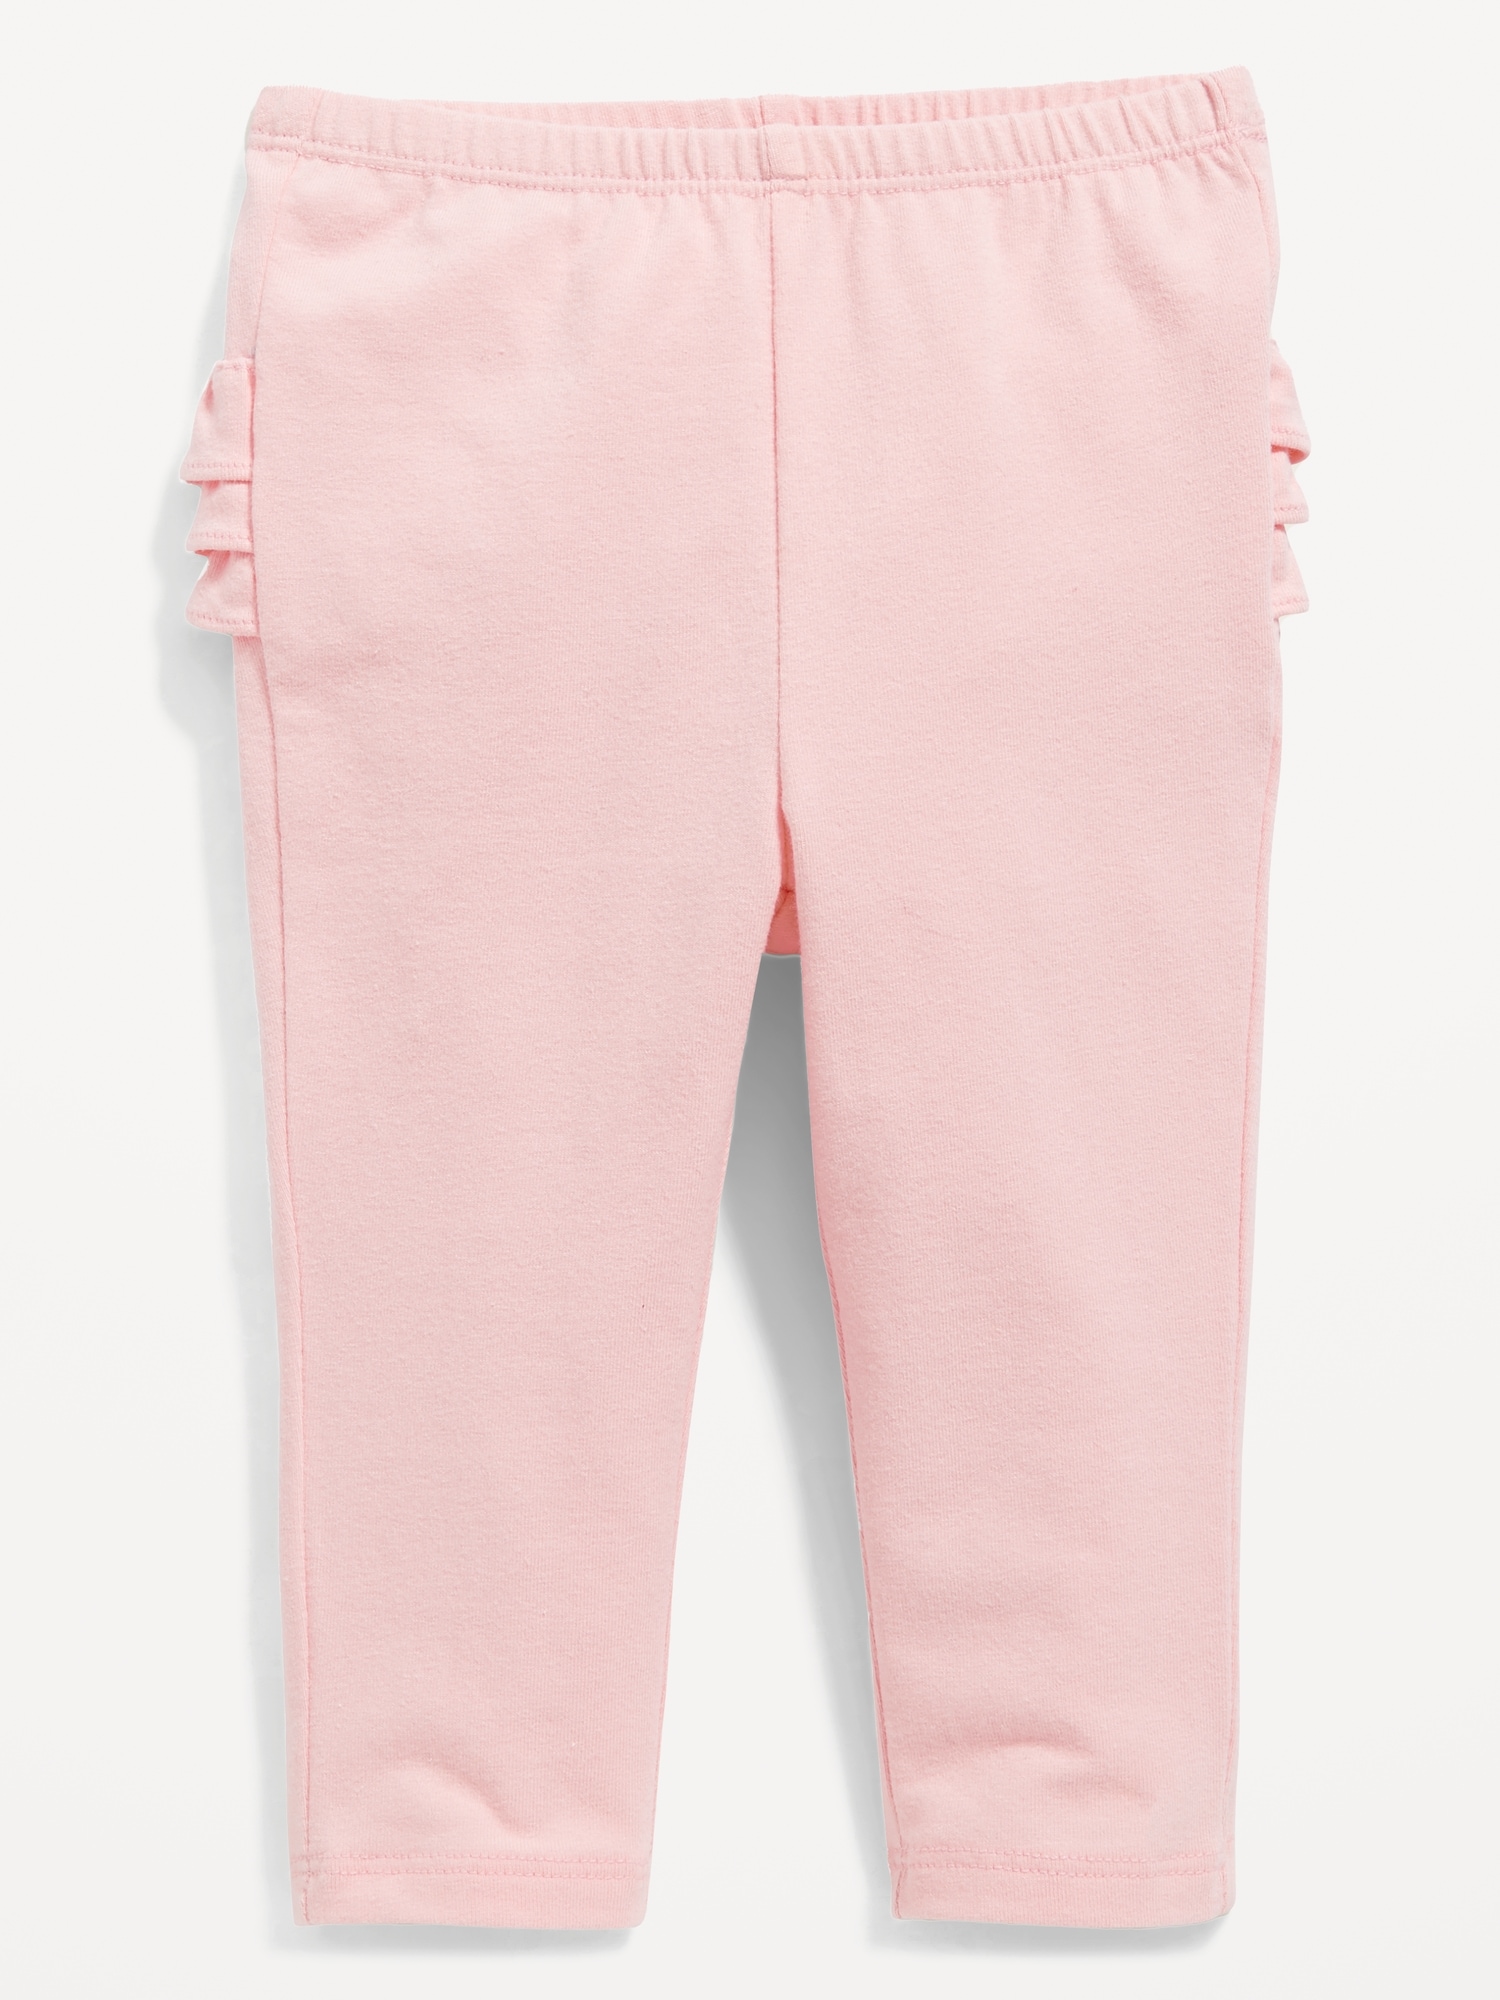 Old Navy Leggings XL 14-16 Pink Cream Pants Girls NEW CLEARANCE SALE 